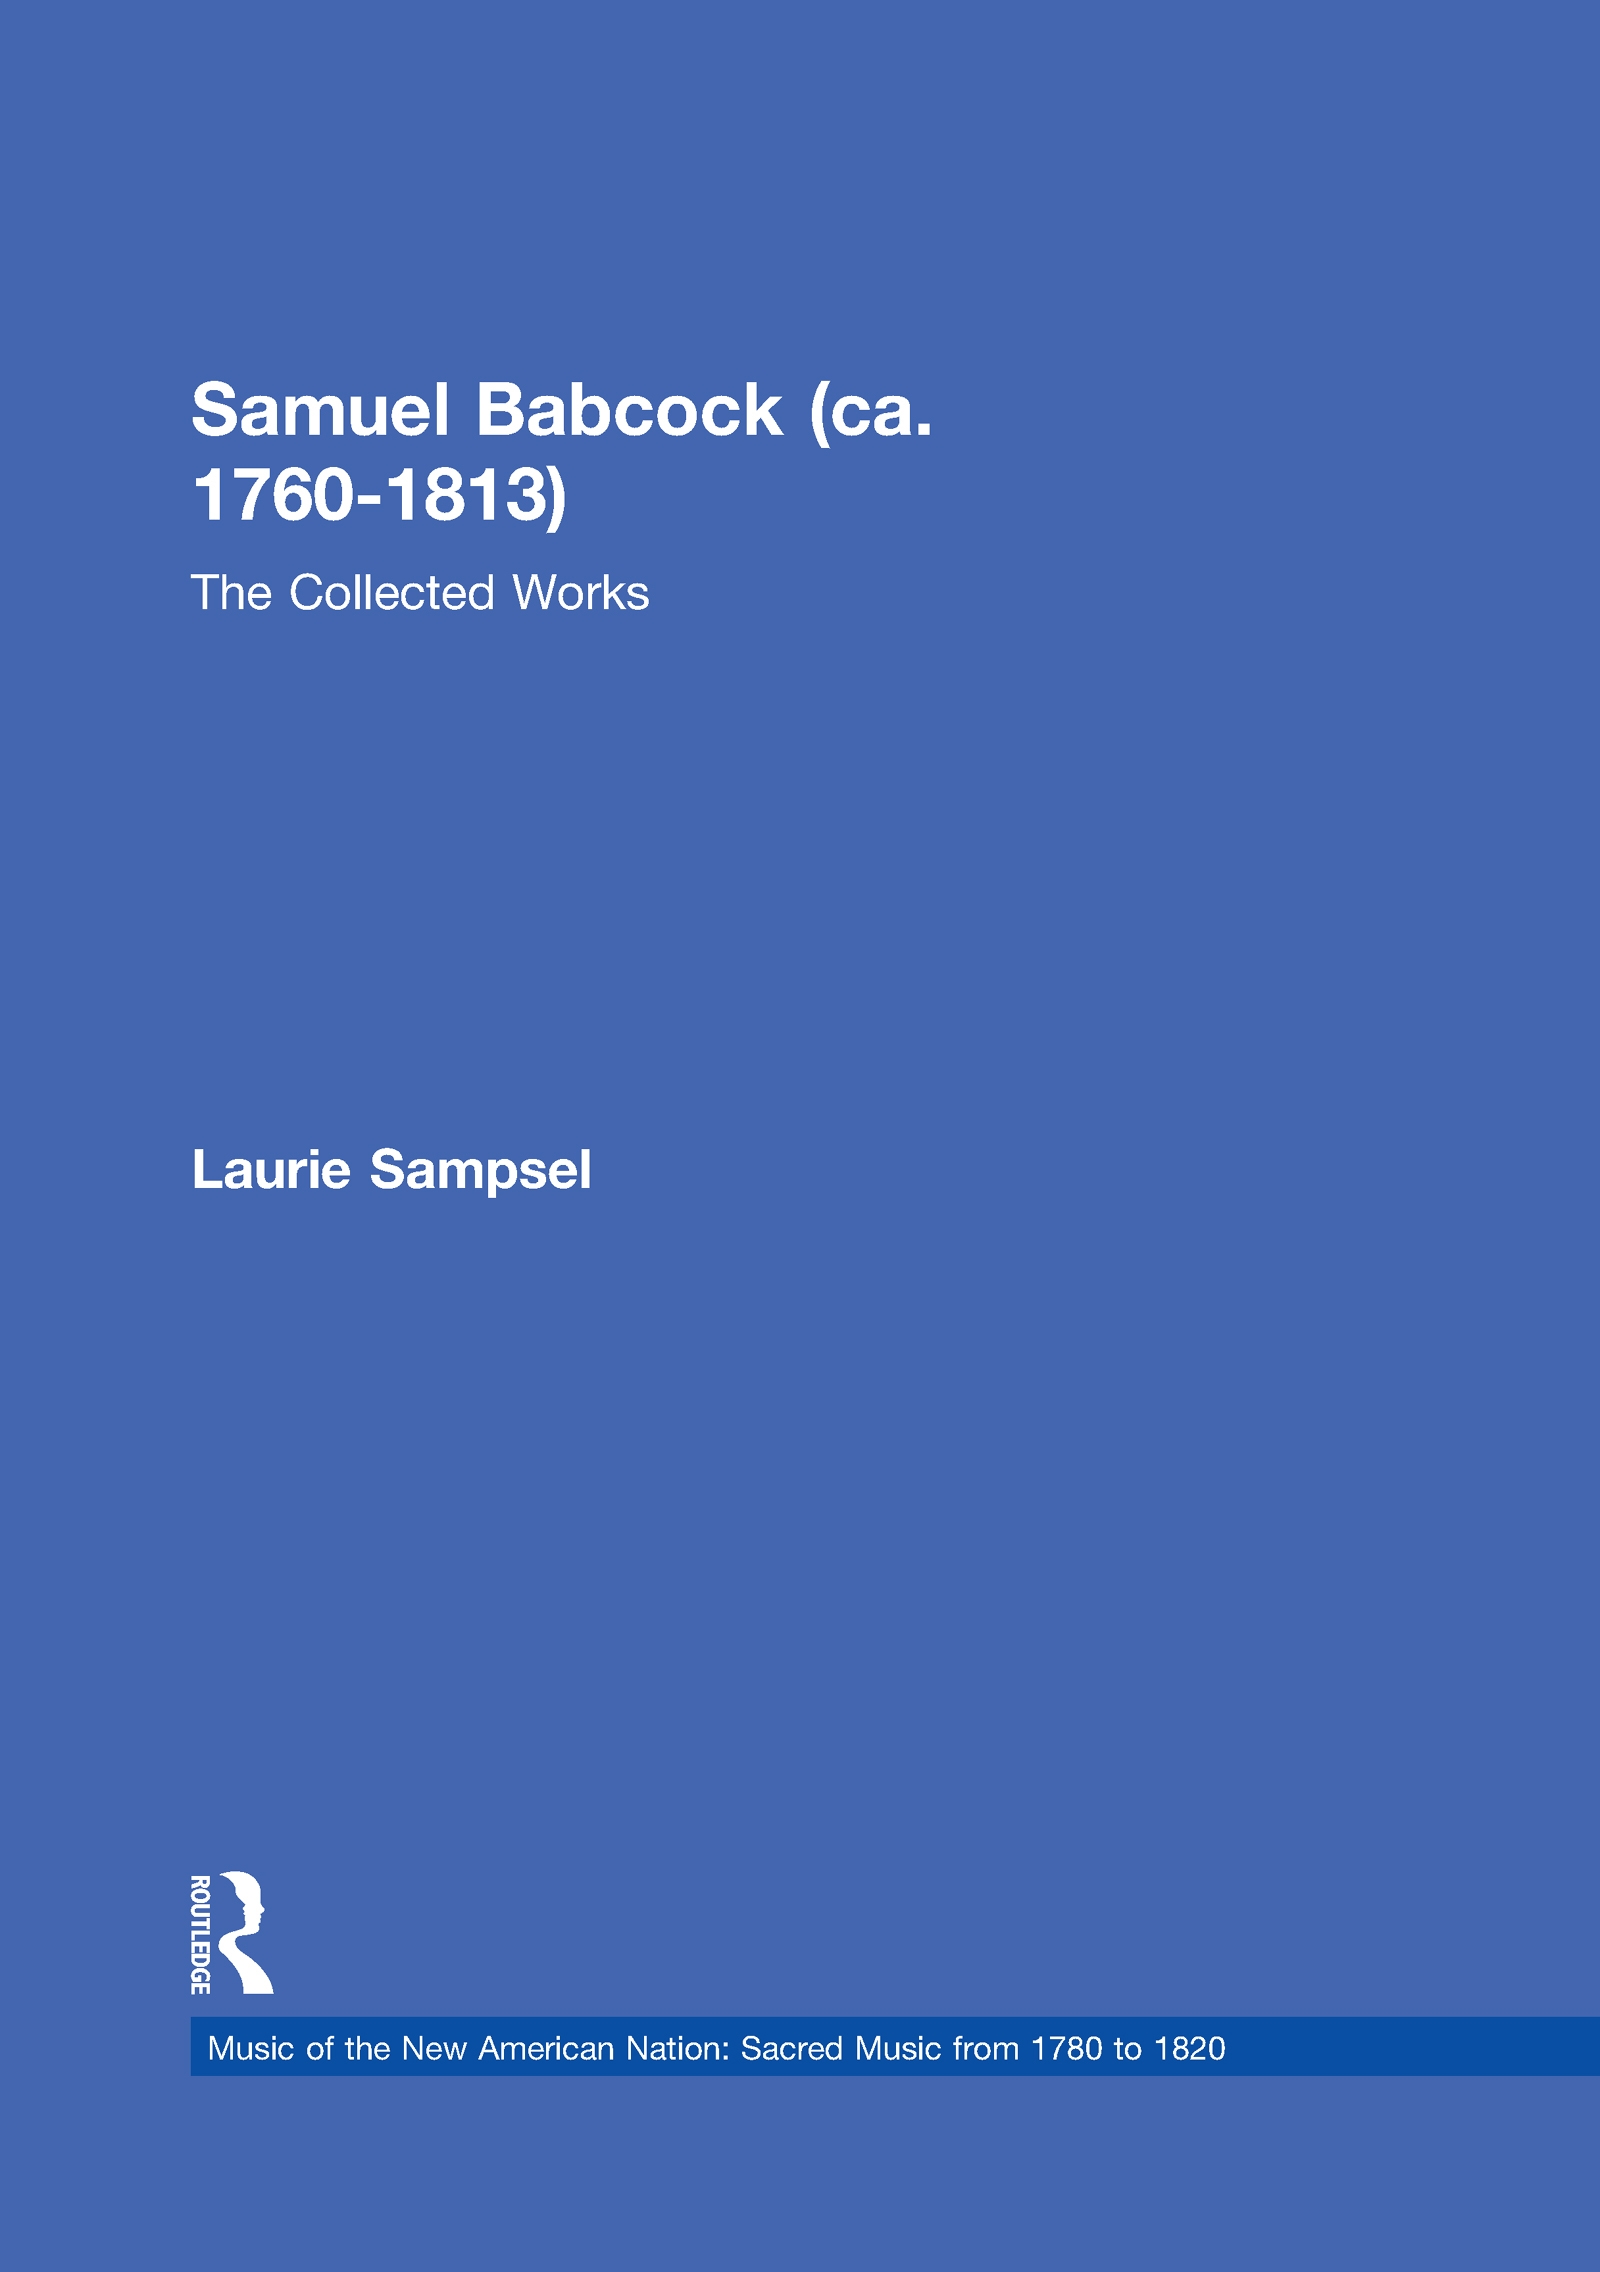 Samuel Babcock (Ca. 1760-1813): The Collected Works